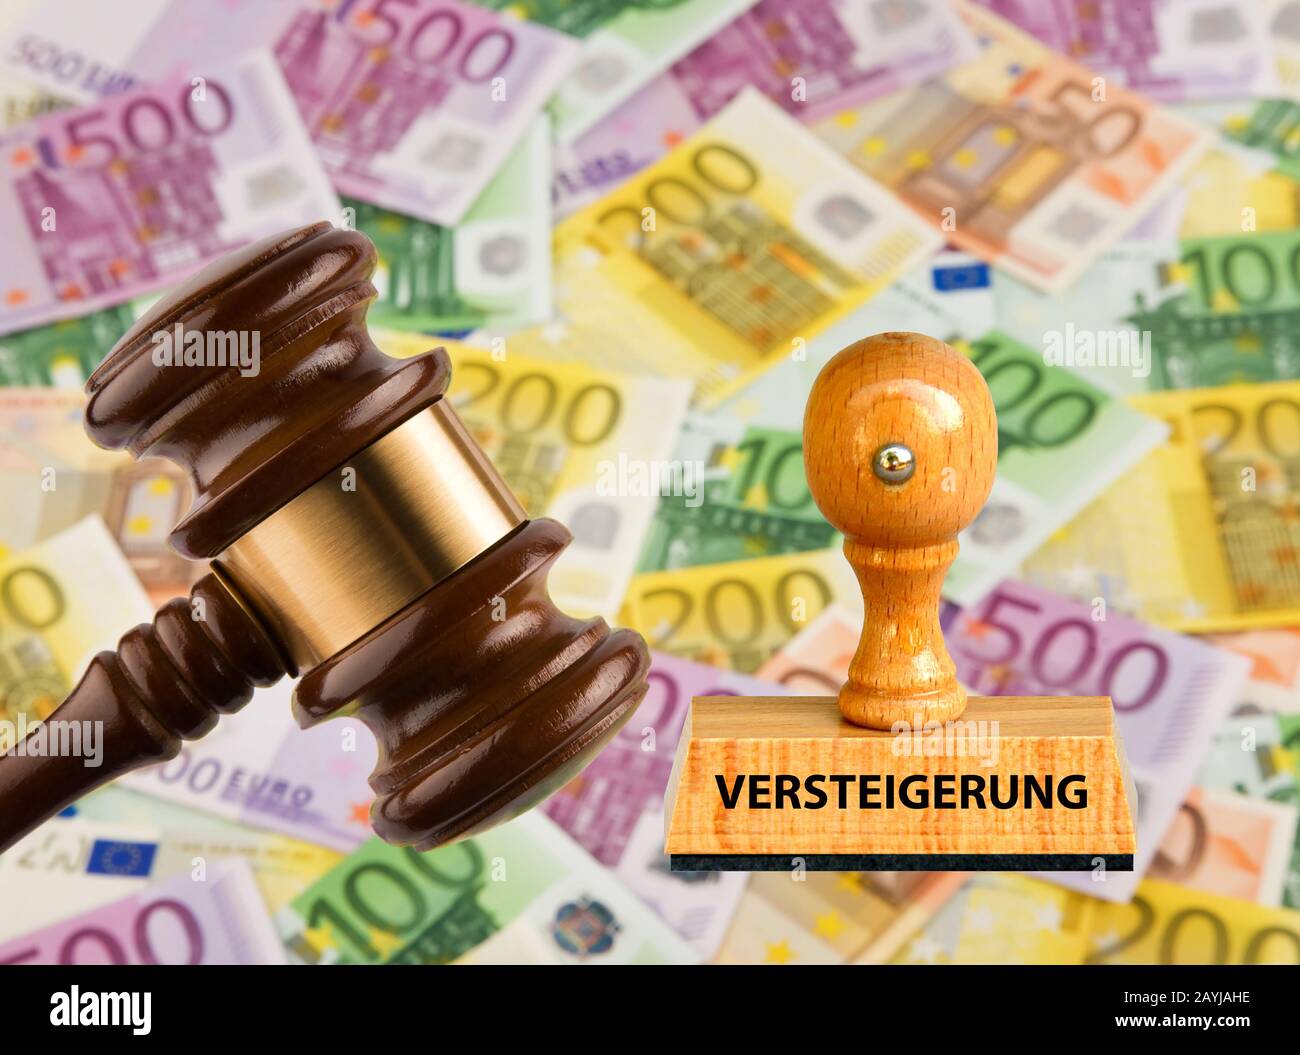 stamp lettering Versteigerung, auction, with justice hammer abd Euro bills, Germany Stock Photo